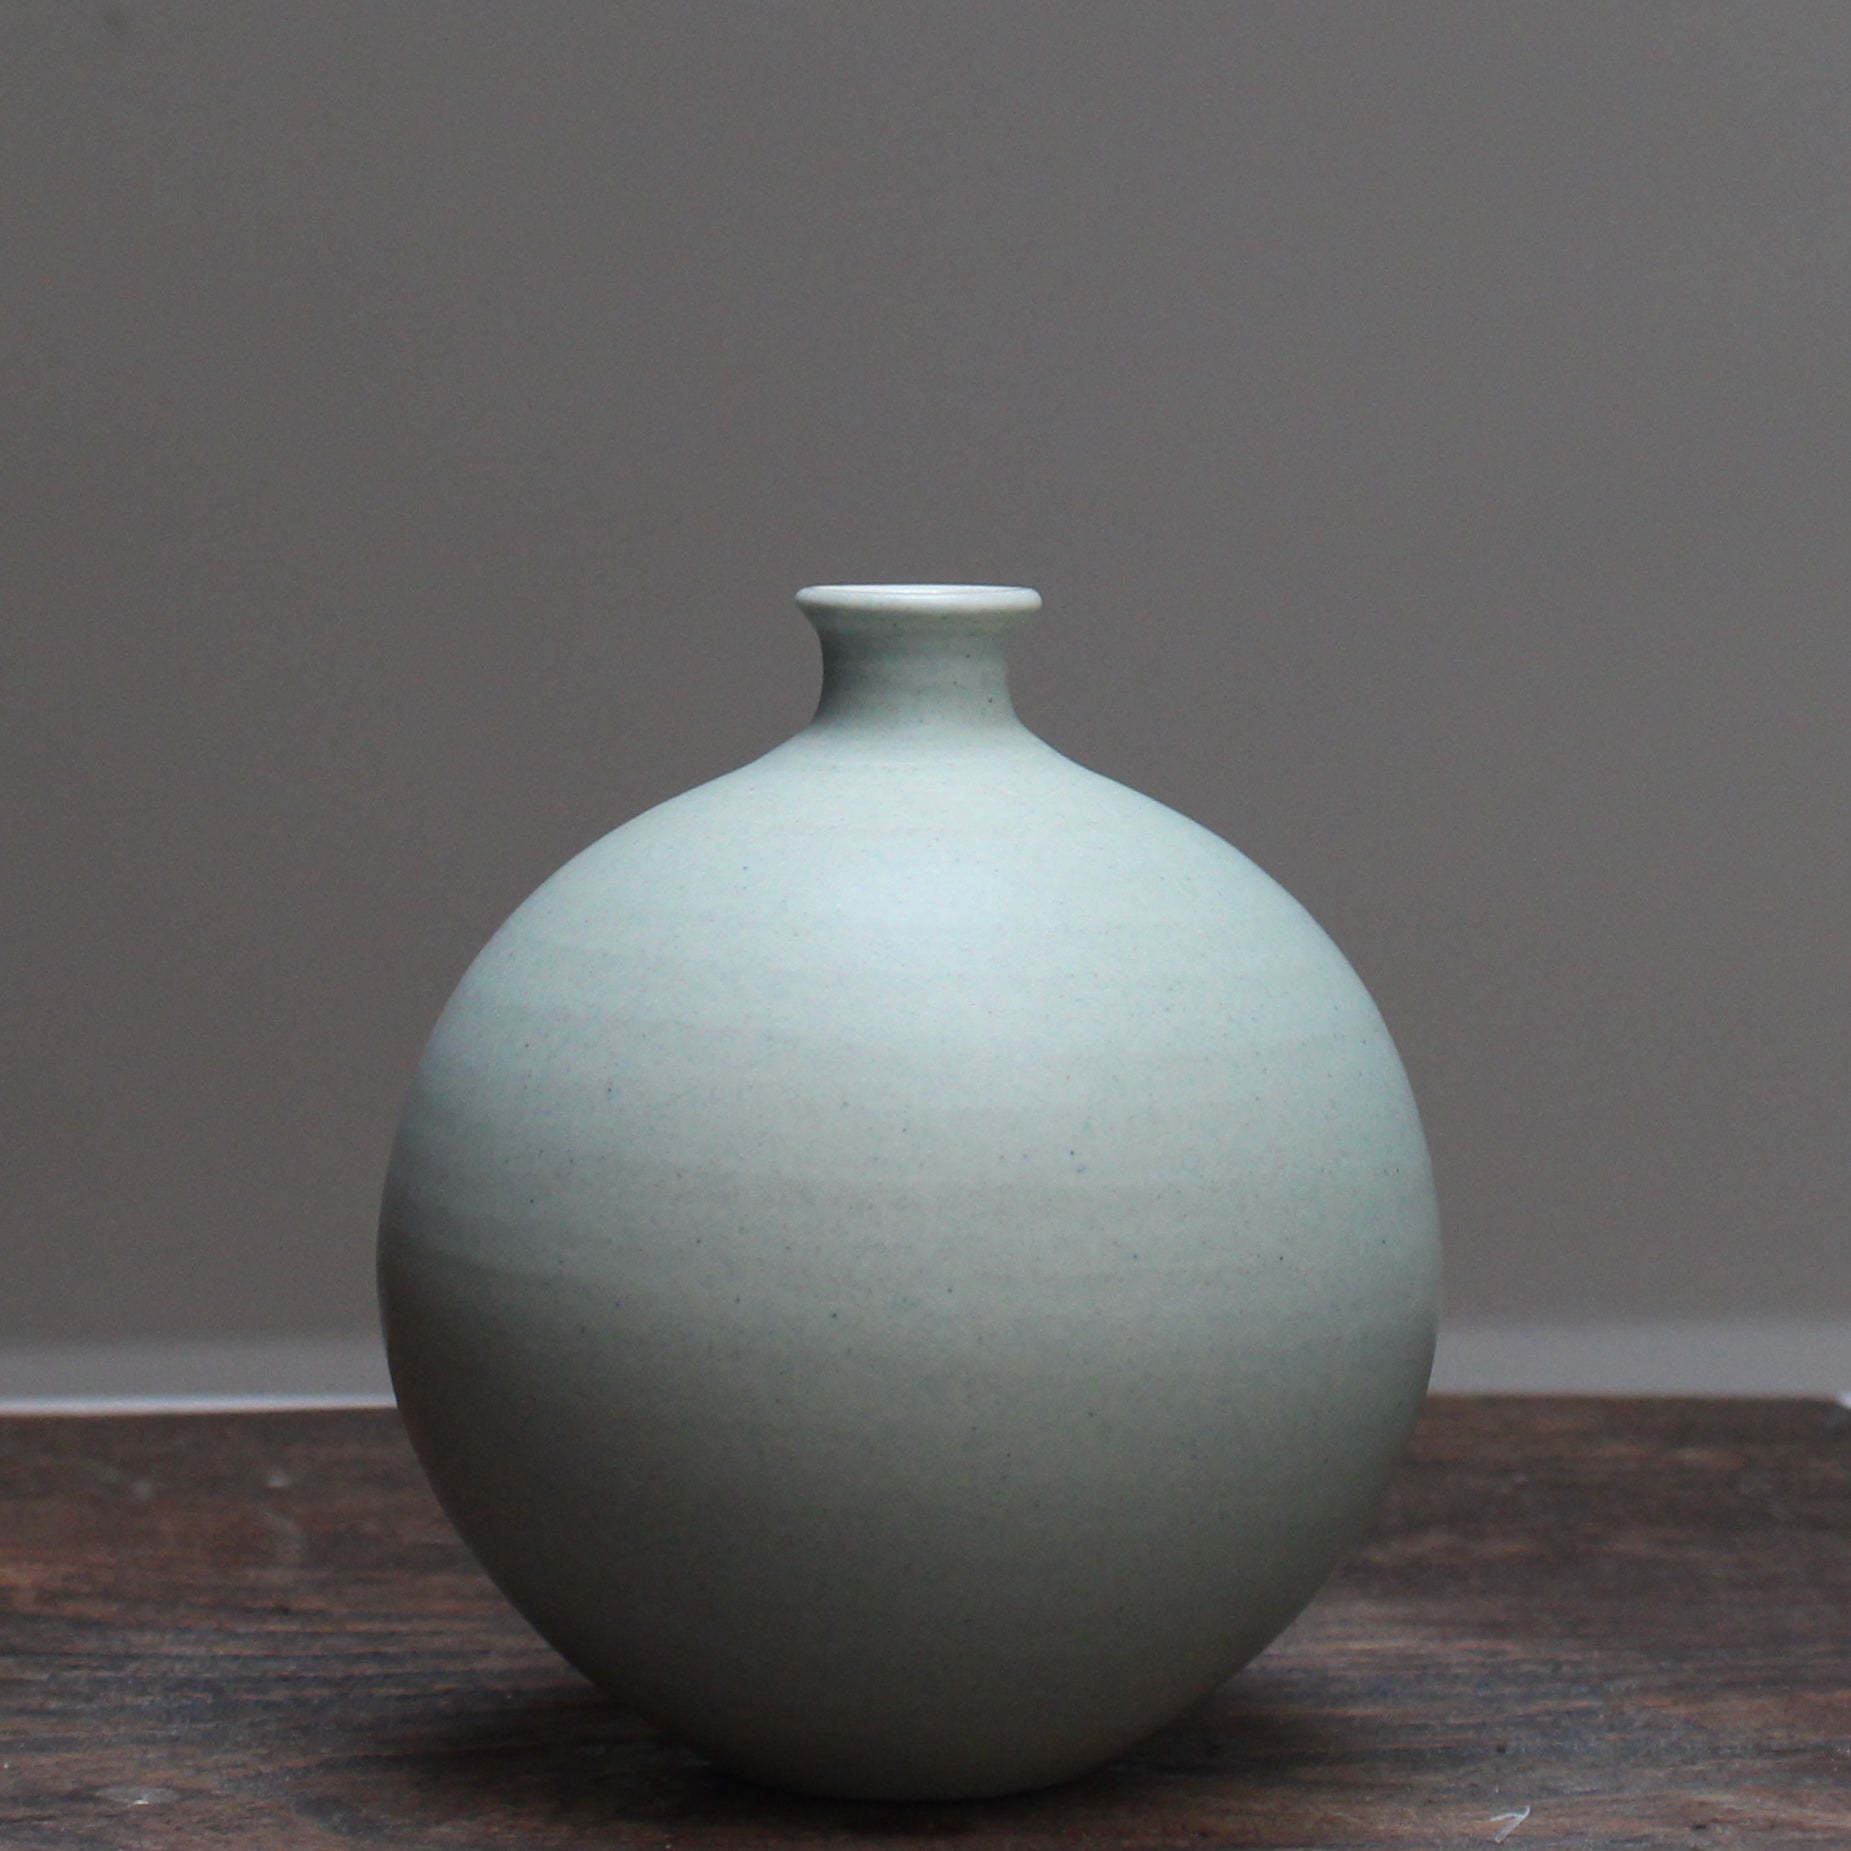 Light green round ceramic bottle by Lucy Burley, on a wooden table at the Byre Gallery 